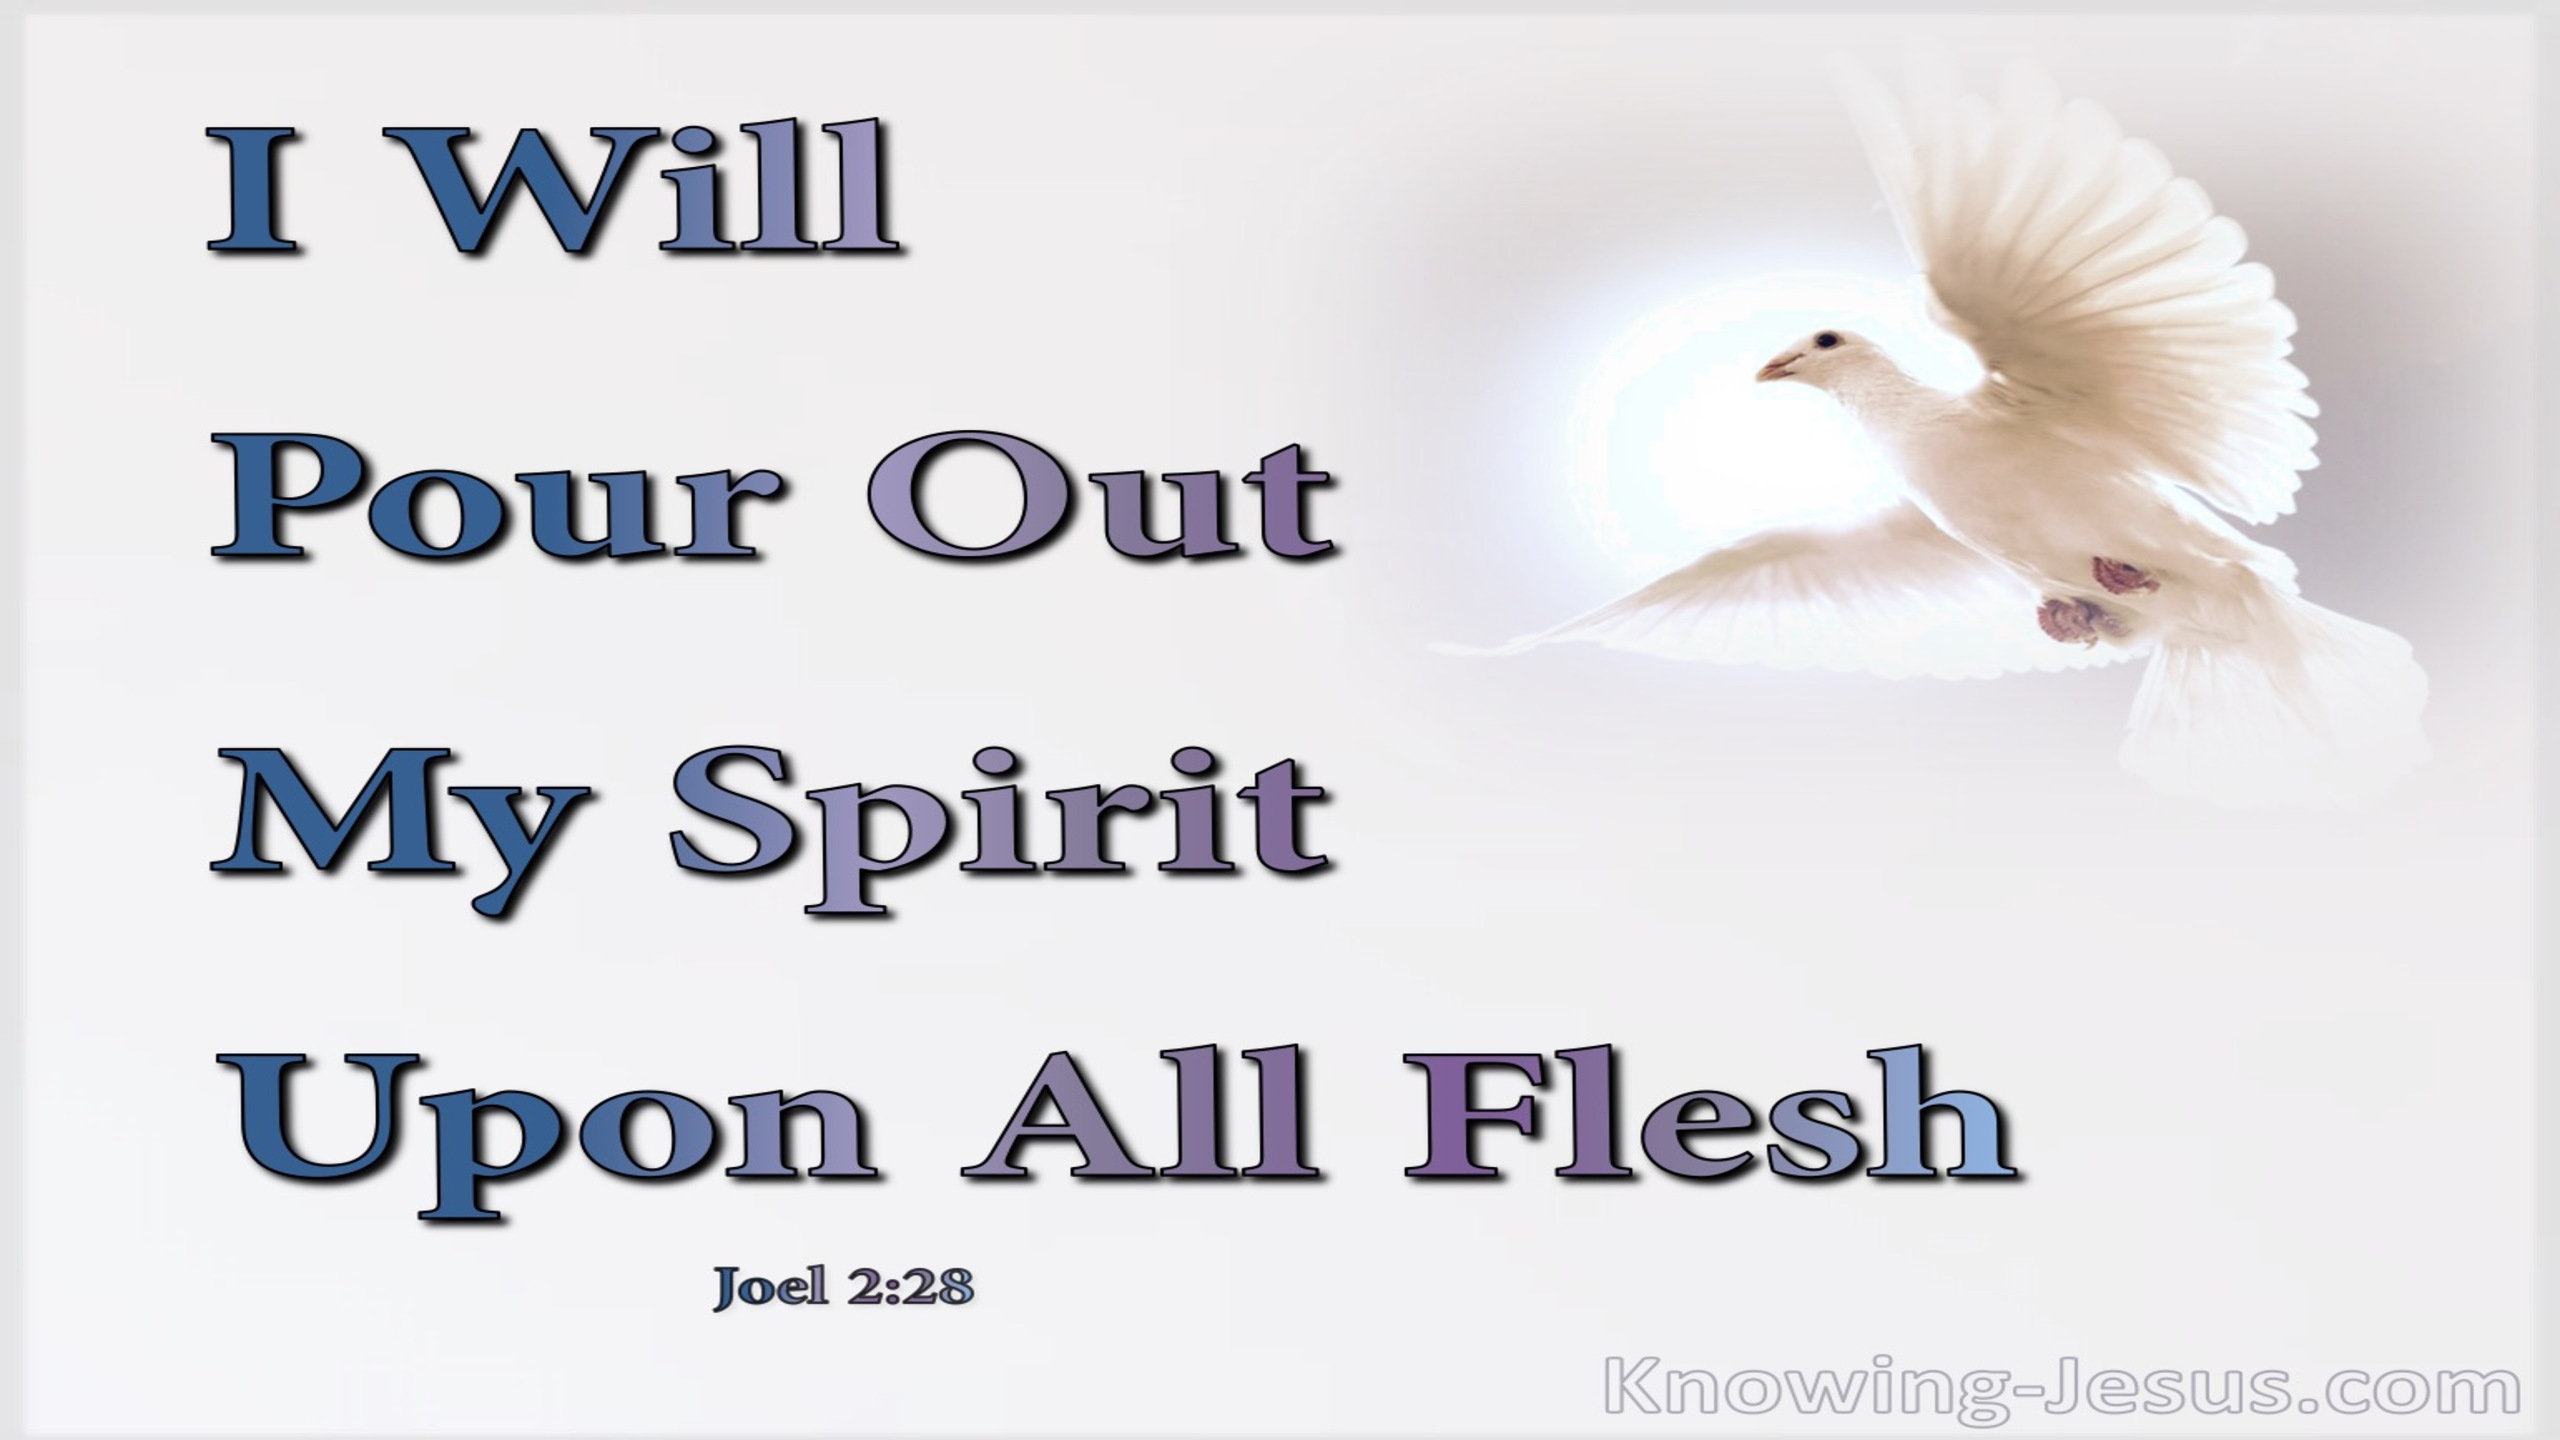 Joel 2:28 I Will Pour Our My Spirit Upon All Flesh (white)